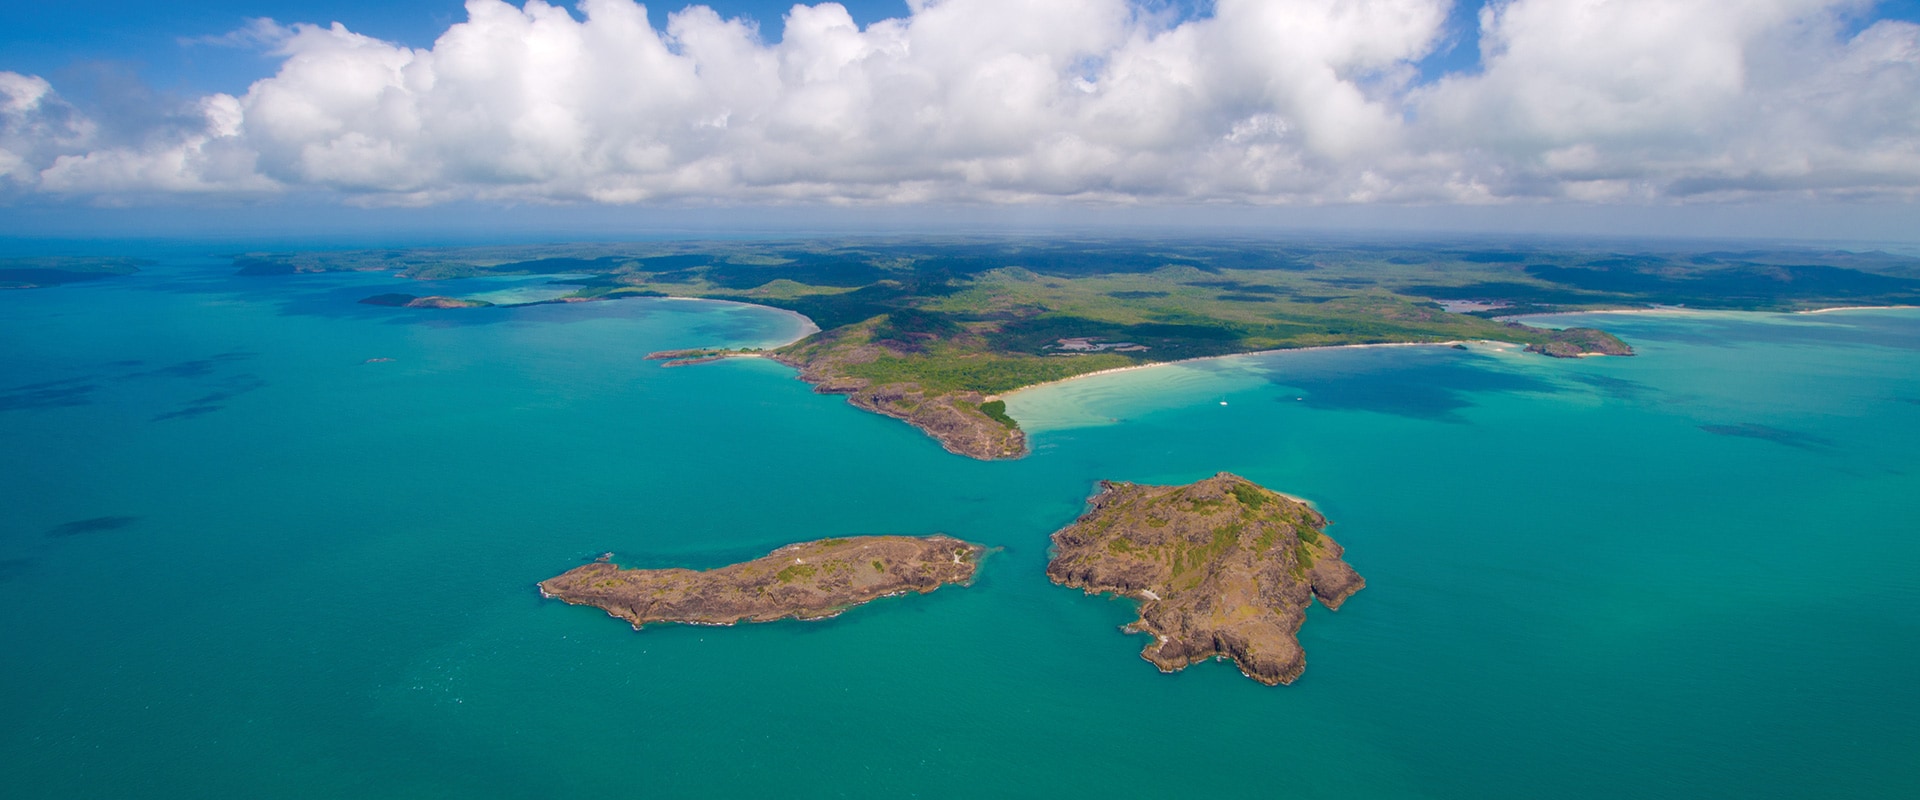 Aerial view of crystal clear blue waters with land in the distance, QLD